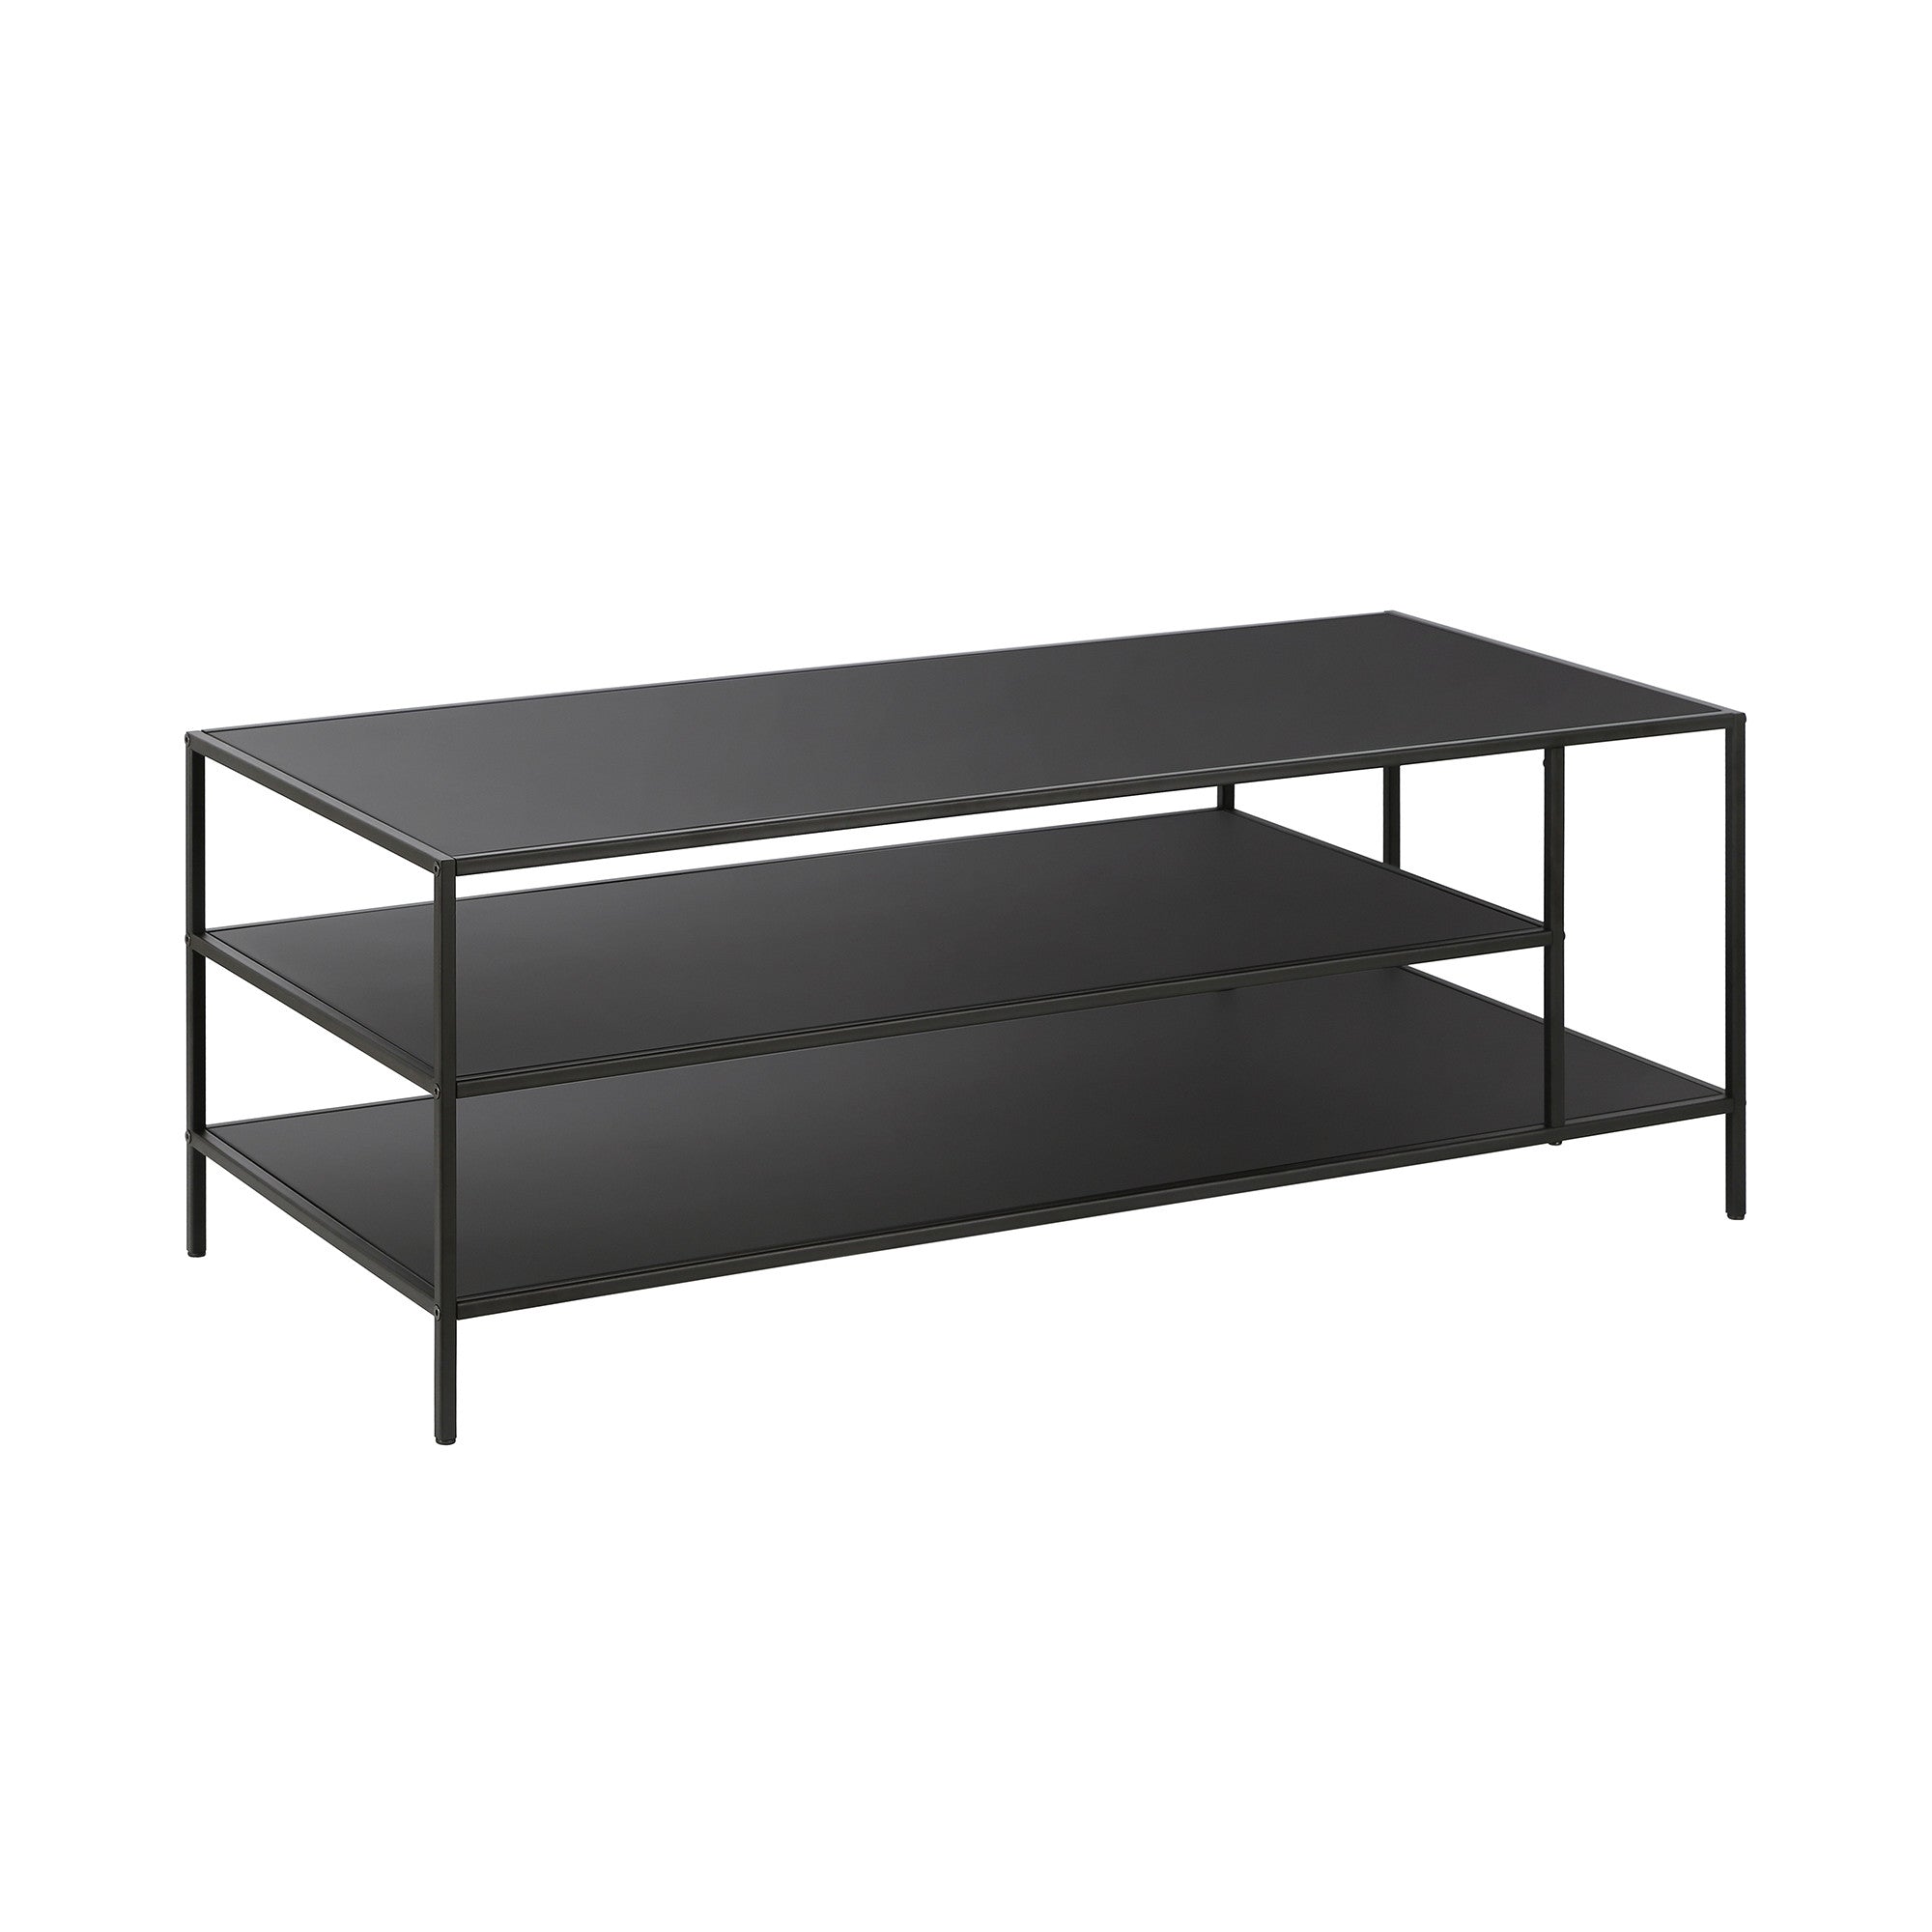 46" Black Steel Coffee Table With Two Shelves